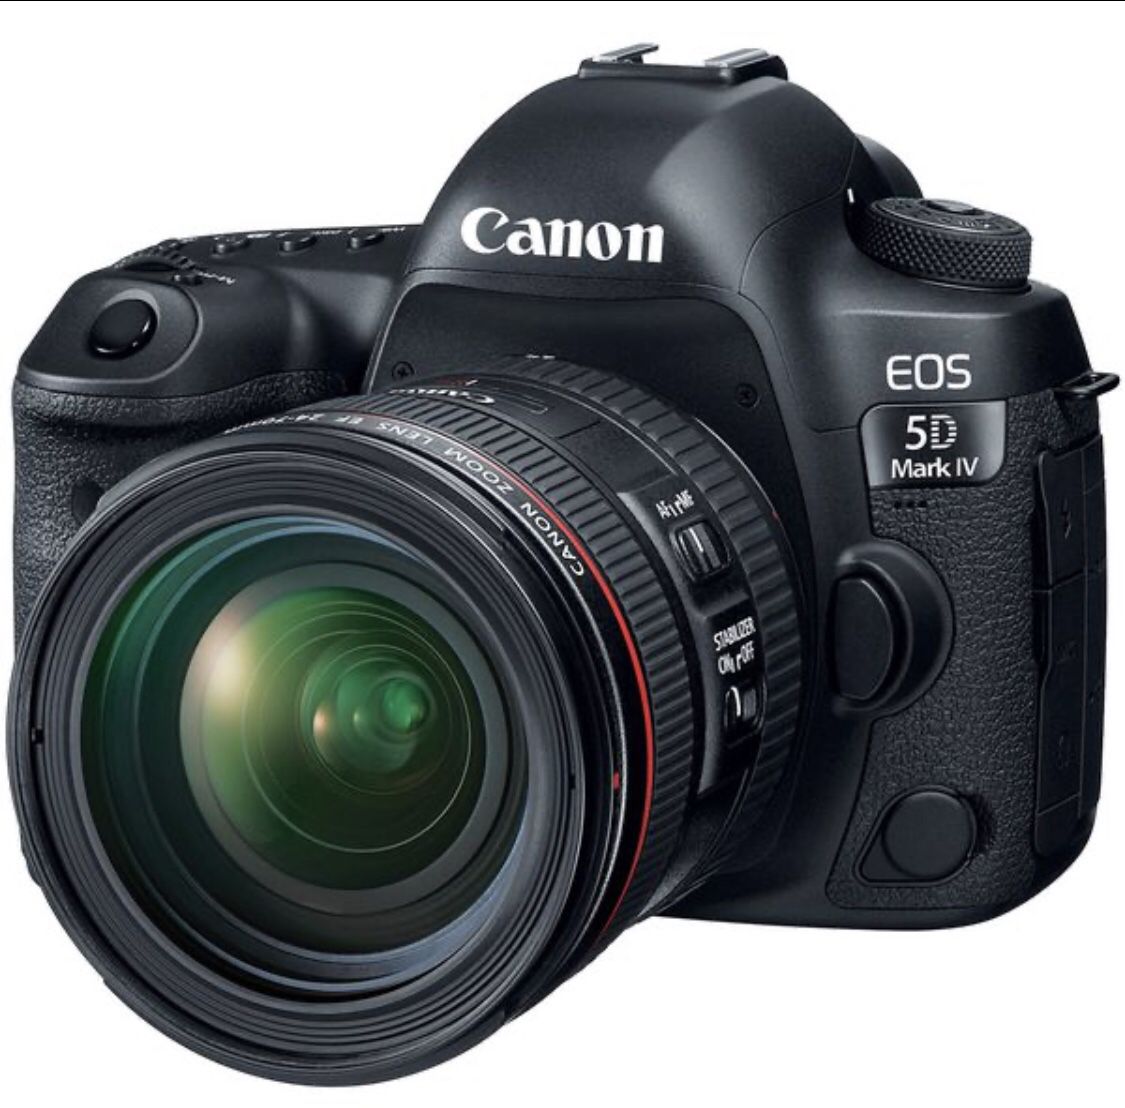 Canon EOS 5D Mark IV DSLR Camera with With 24-70mm Lens f/4L II Lens and Accessory